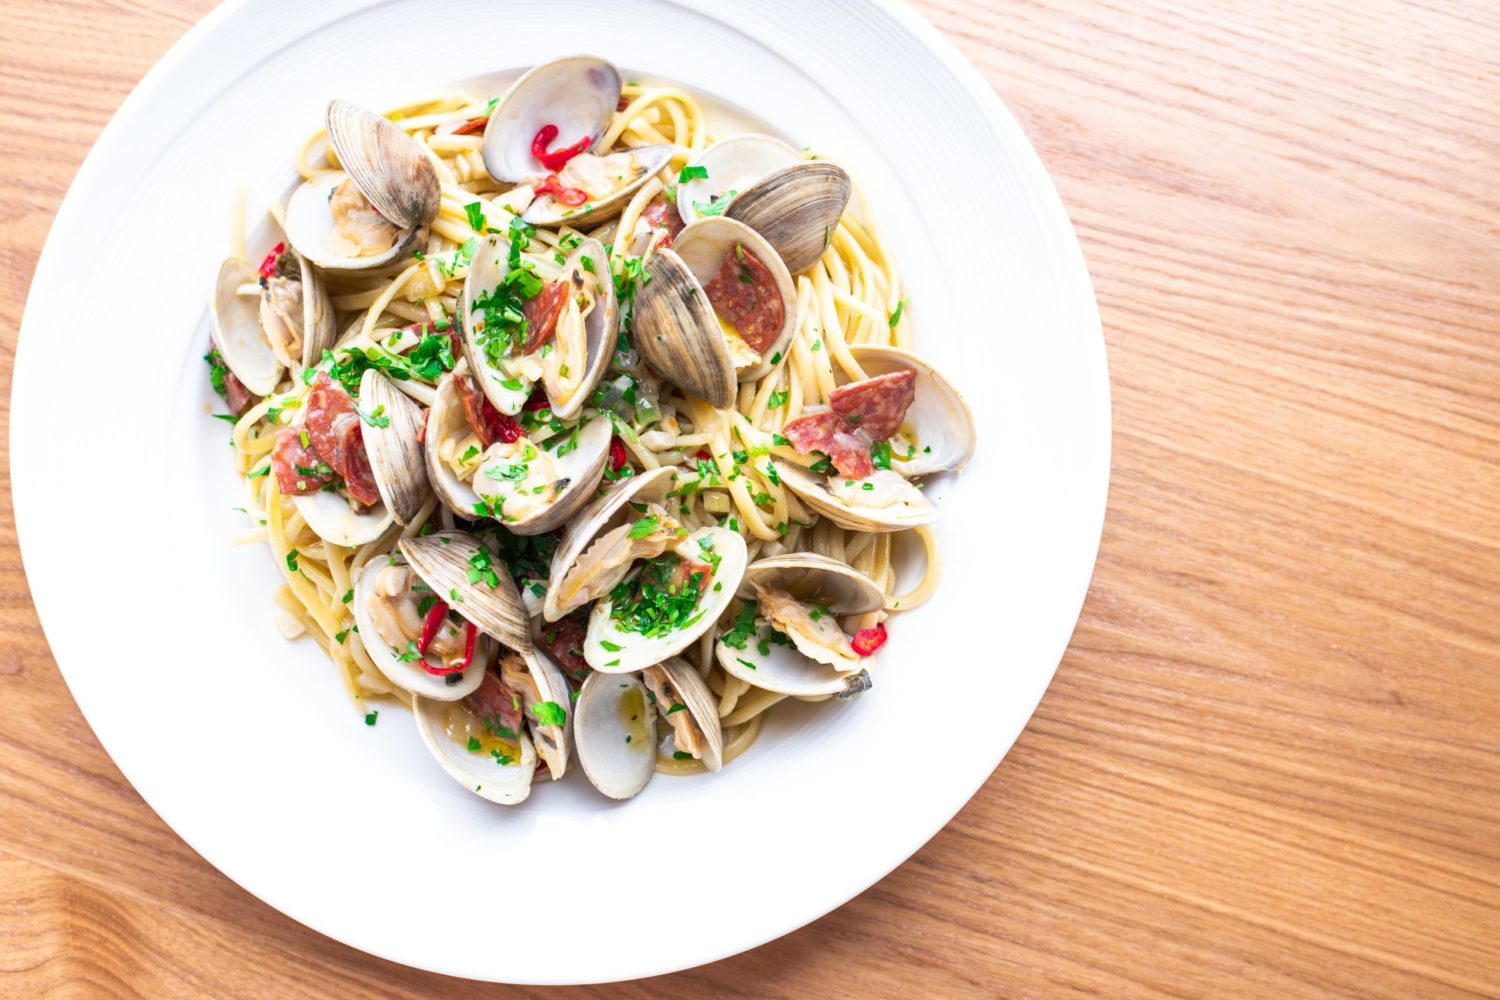 Pasta is handmade daily and topped with ingredients like clams or springy ramps. Photograph by Kelli Scott.